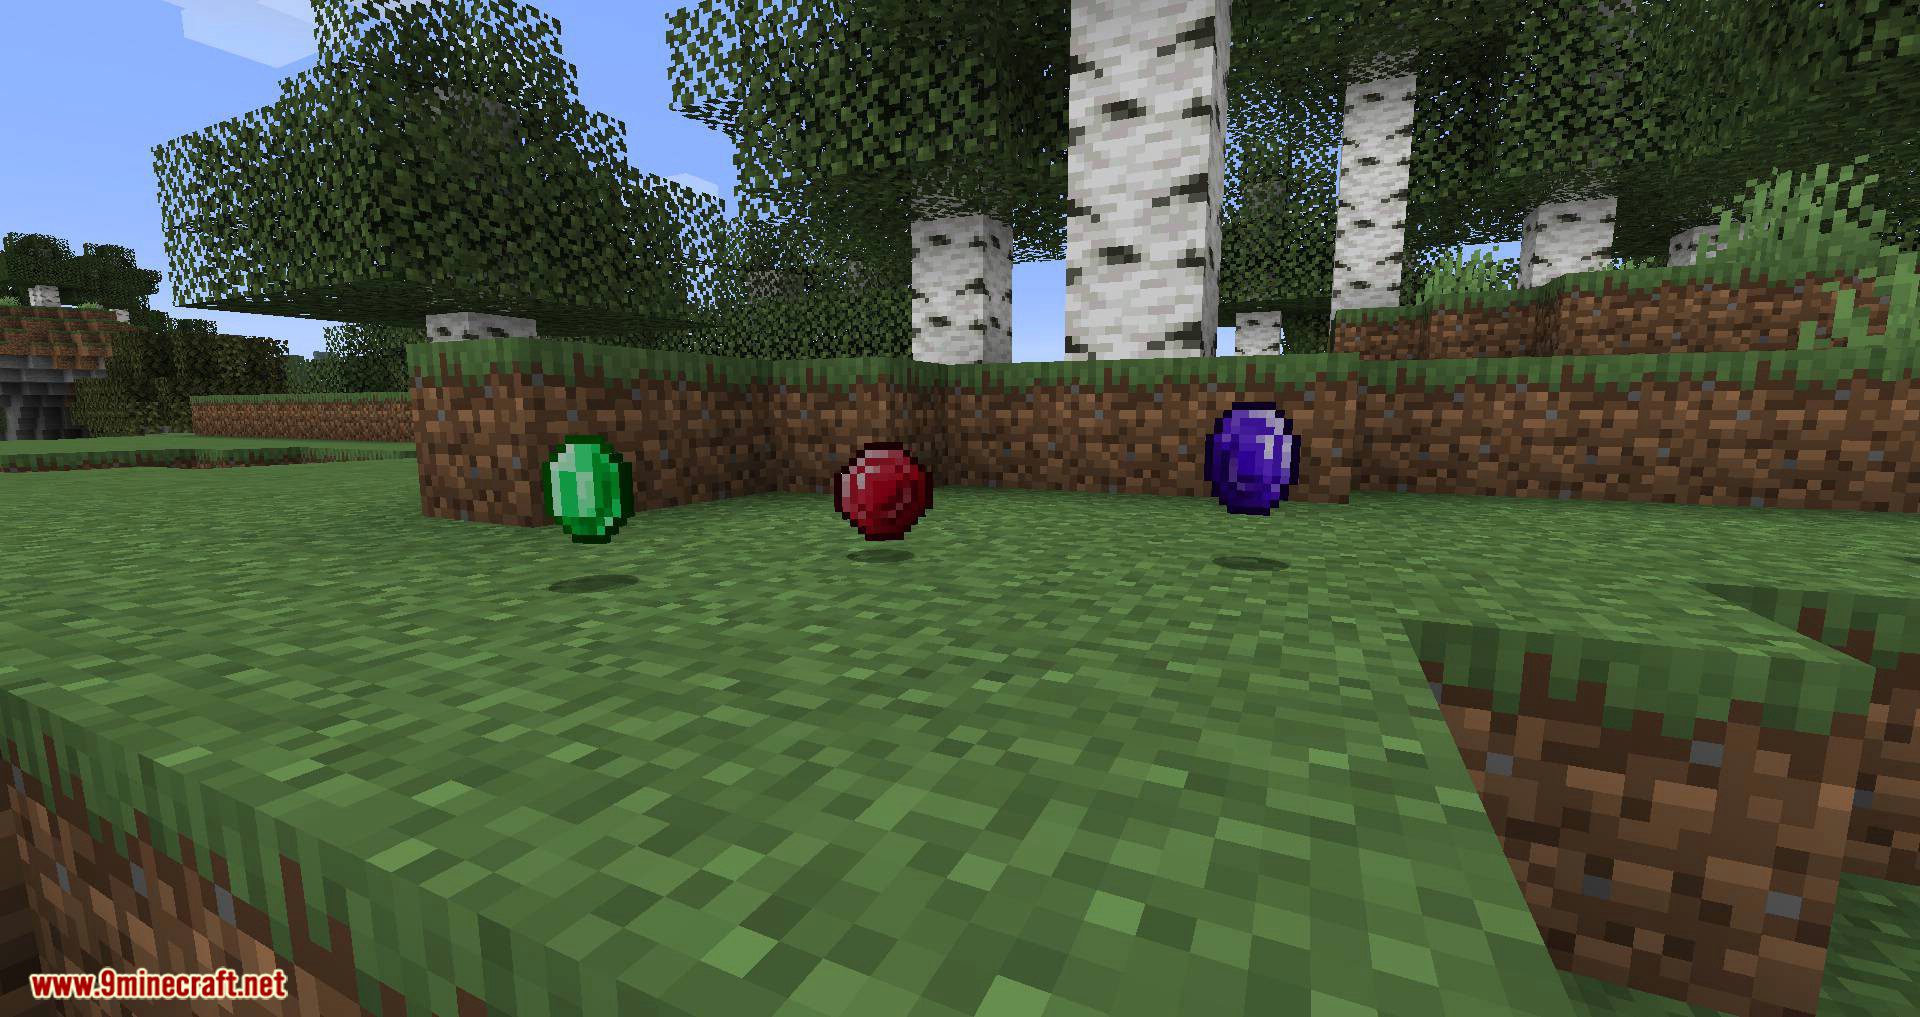 More Ores In ONE Mod (1.19.2, 1.18.2) - Ores in the Overworld, Nether, and End 8